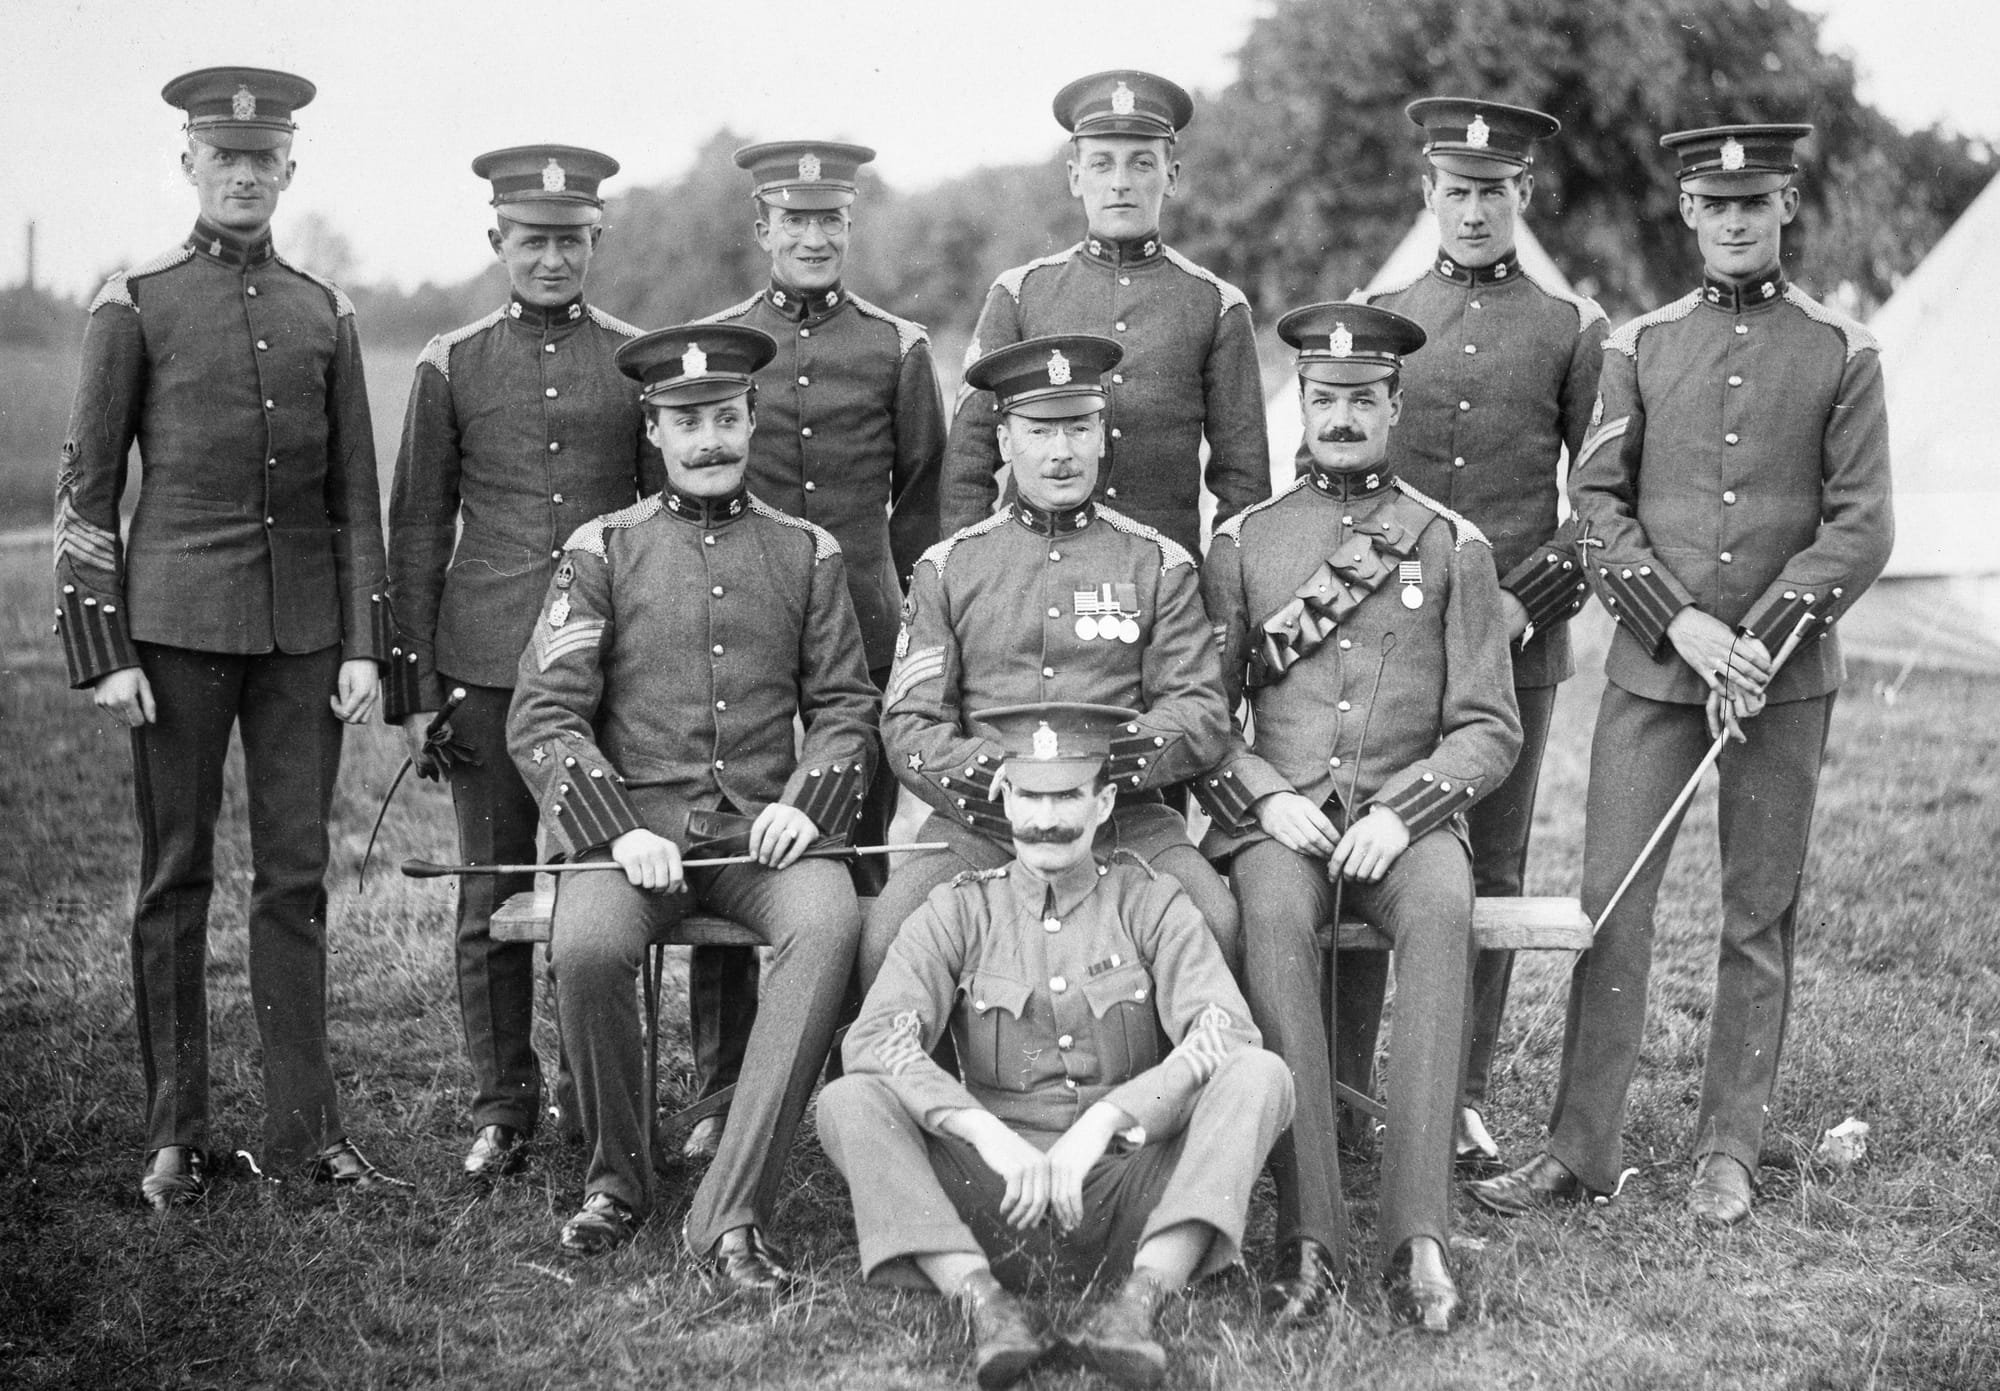 KEH NCOs in Undress uniform circa 1911. Squadron Serjeant Major Harry Campbell Calvert is the centre figure of the middle row. Courtesy David Knight.